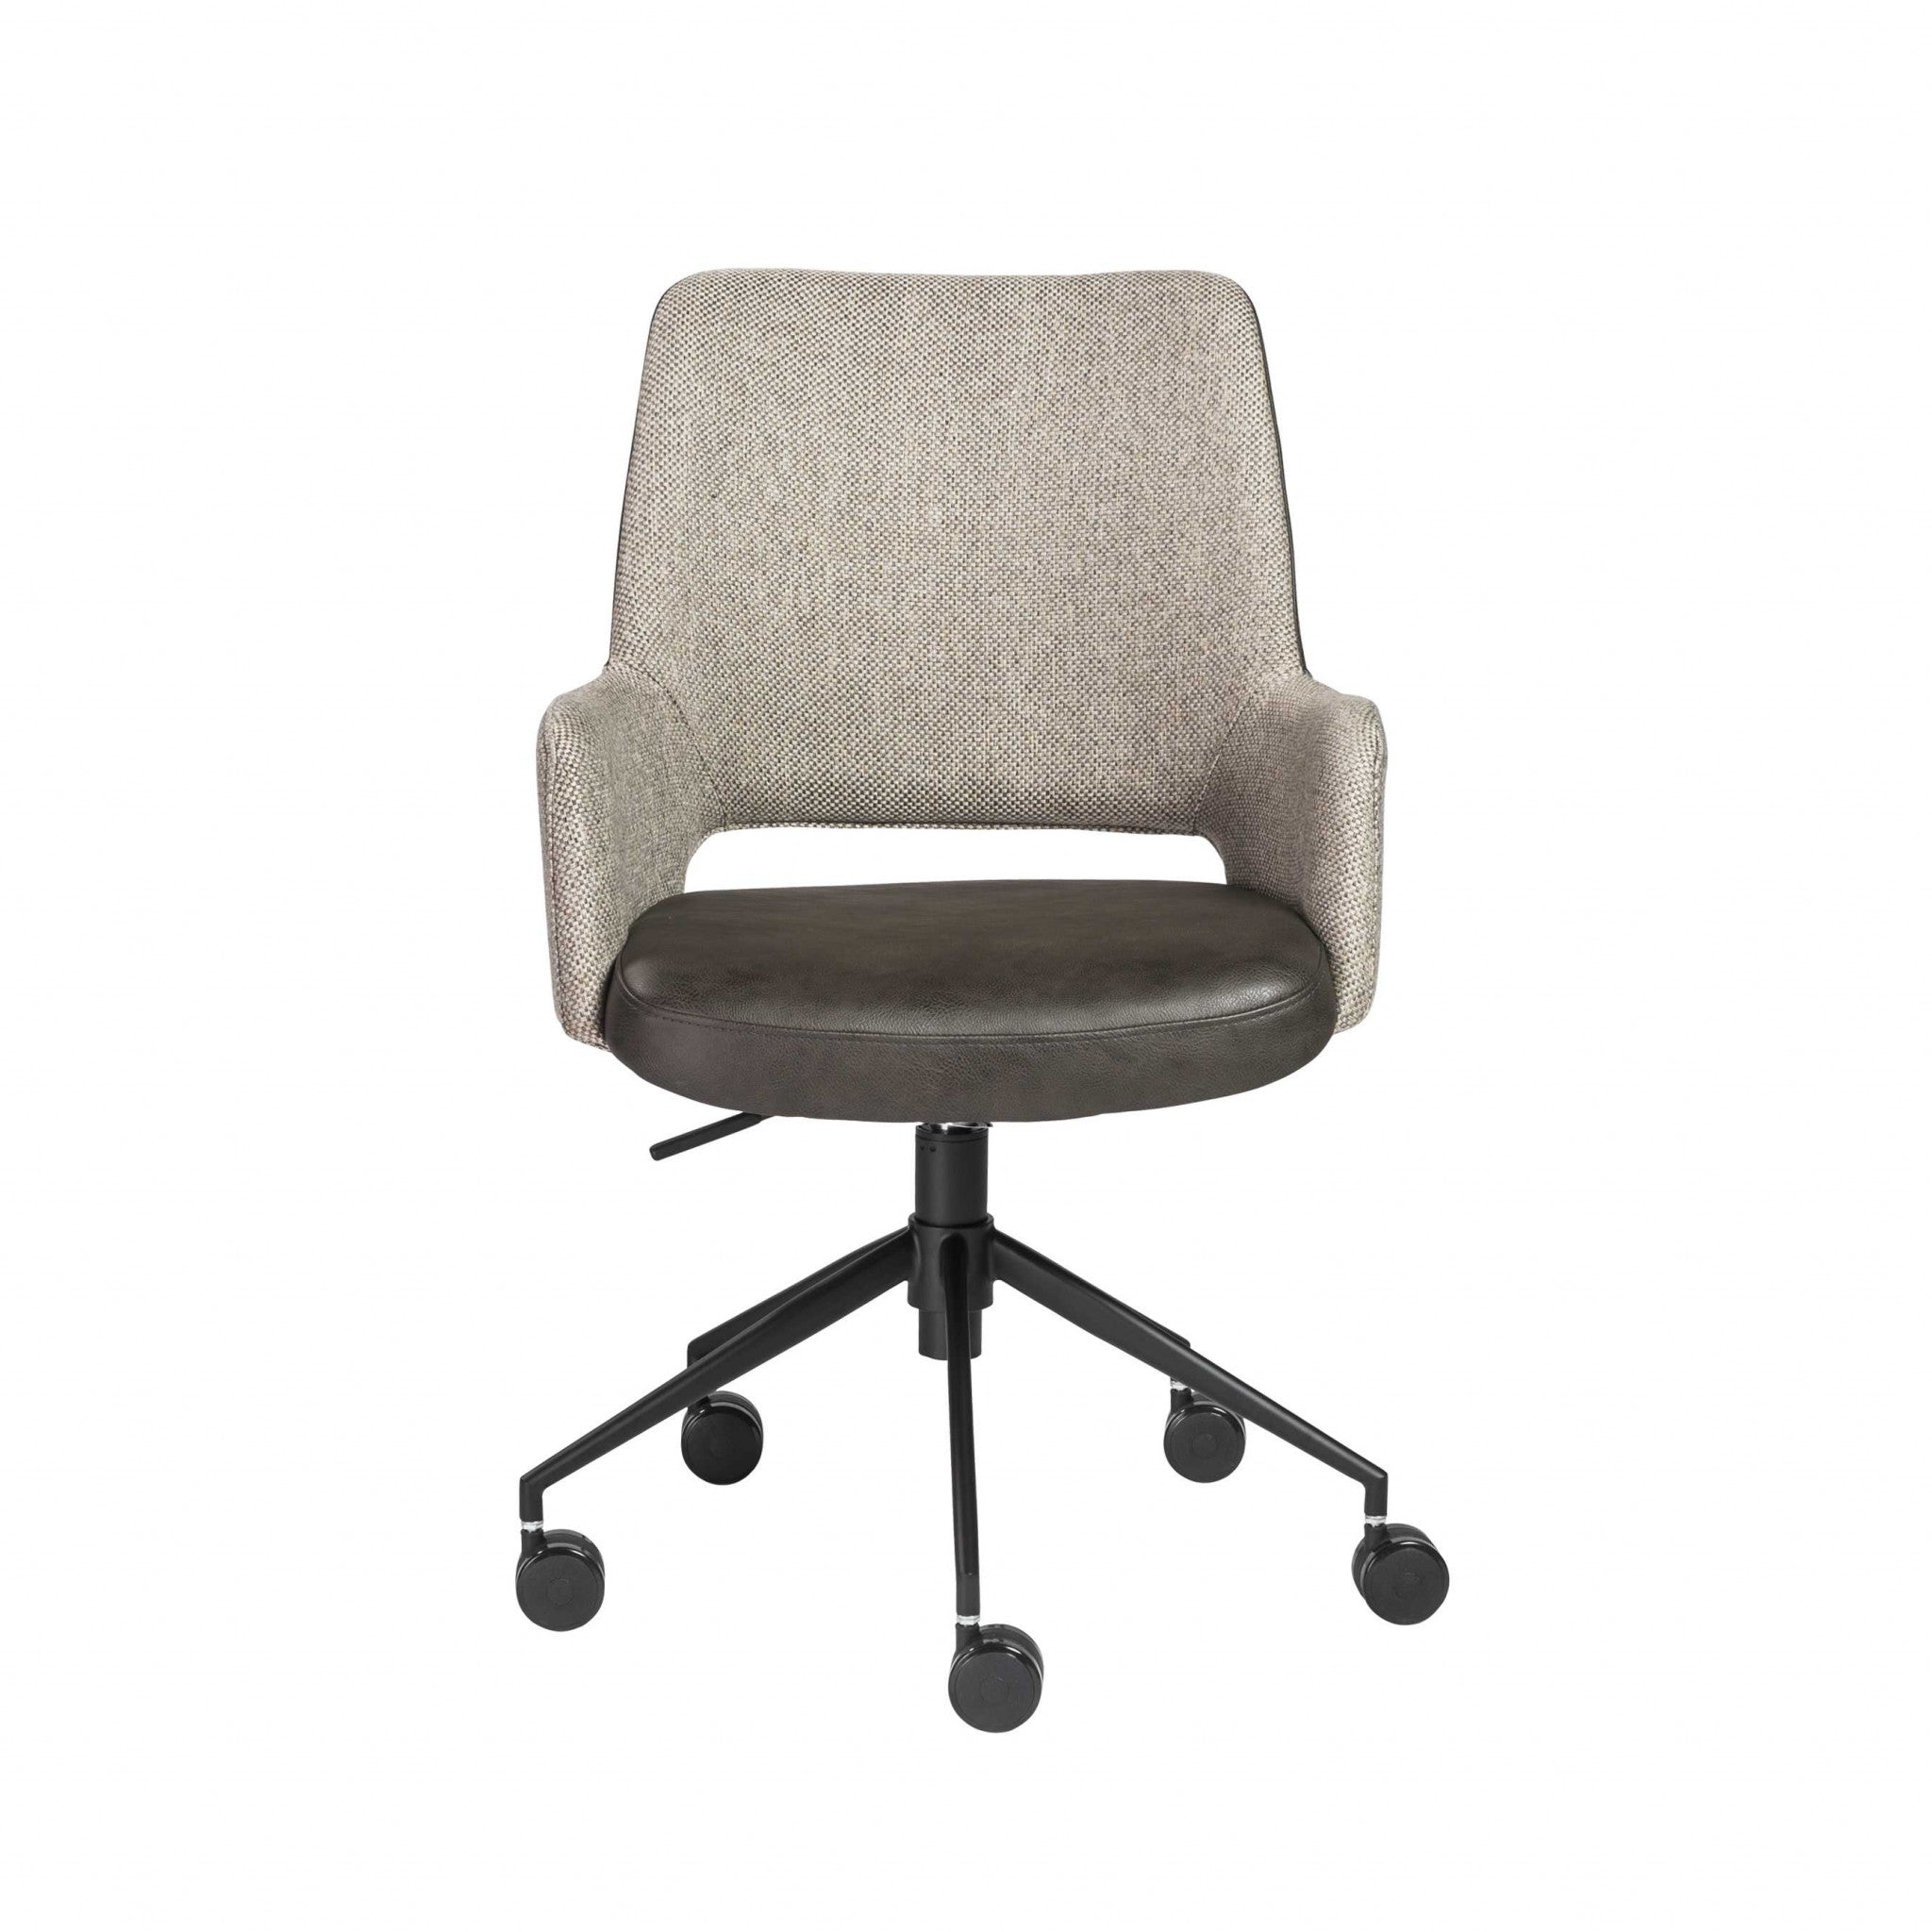 Slate-Gray-Linen-Seat-Swivel-Adjustable-Task-Chair-Fabric-Back-Steel-Frame-Office-Chairs